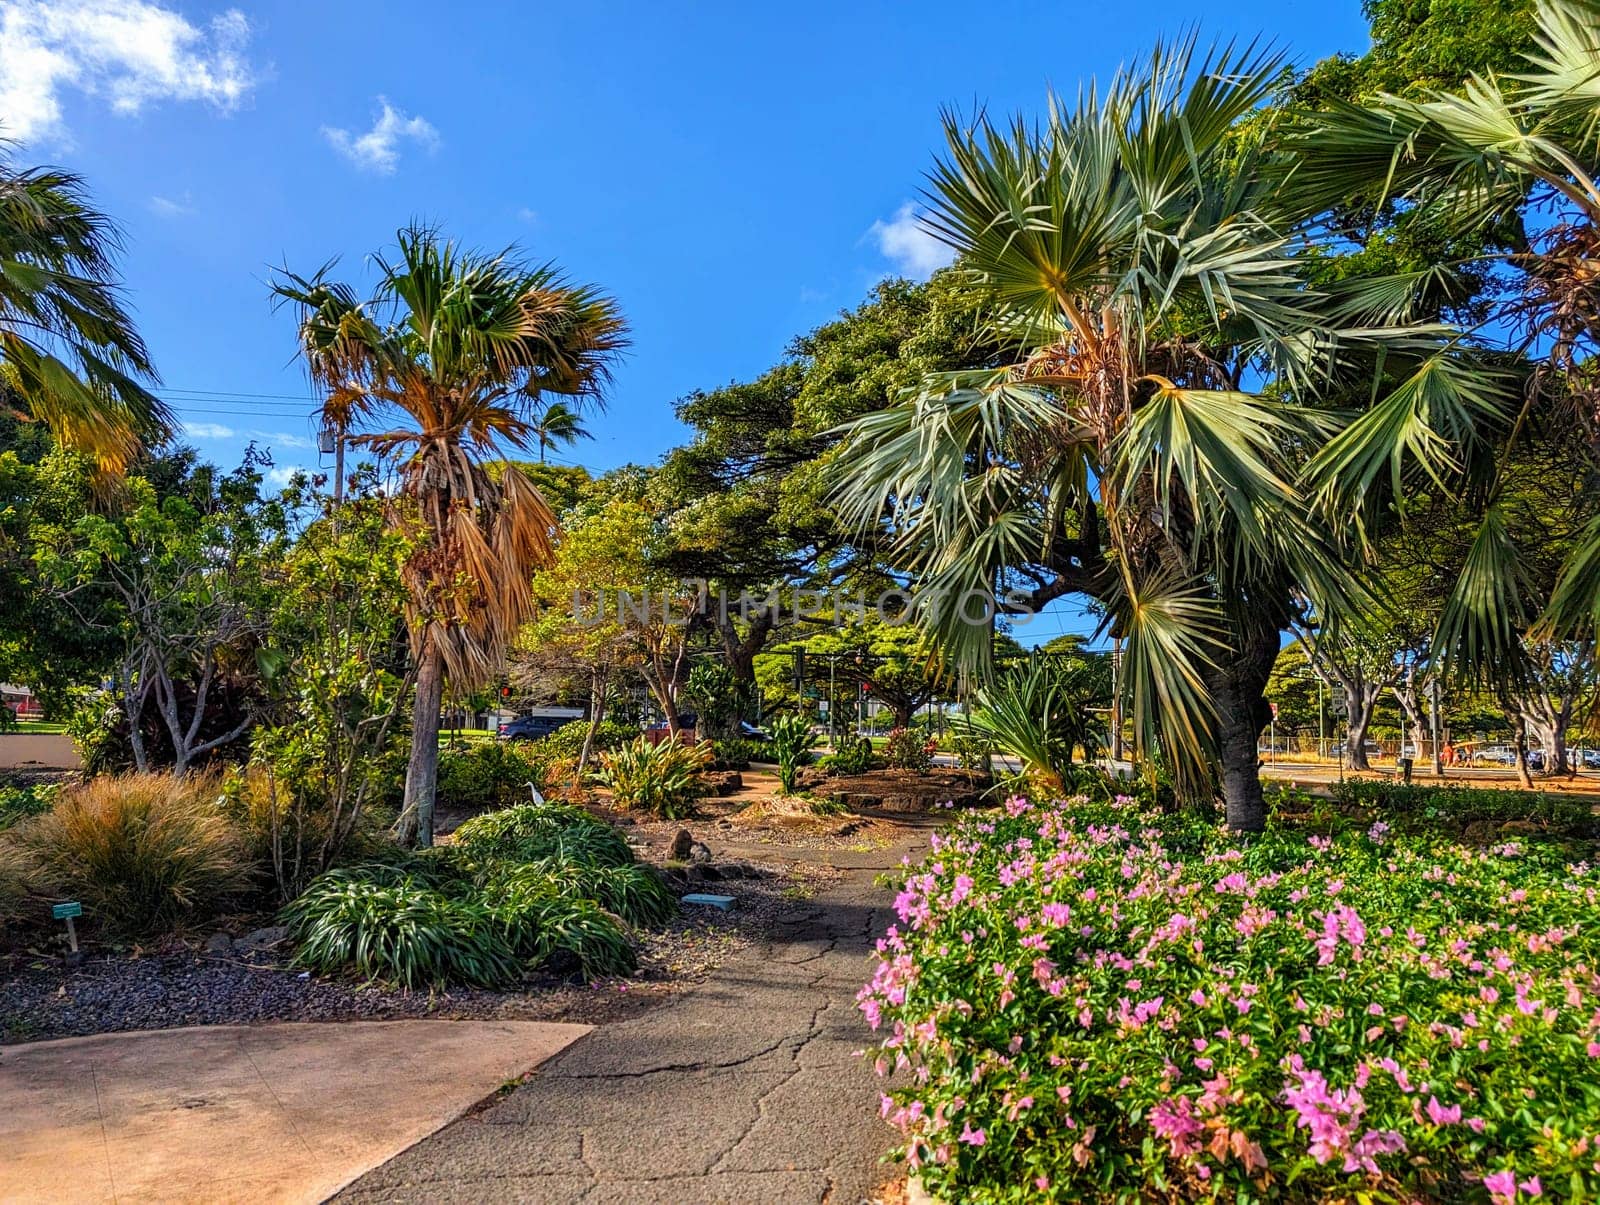 Queen Kapiolani Garden and Park on Oahu by EricGBVD